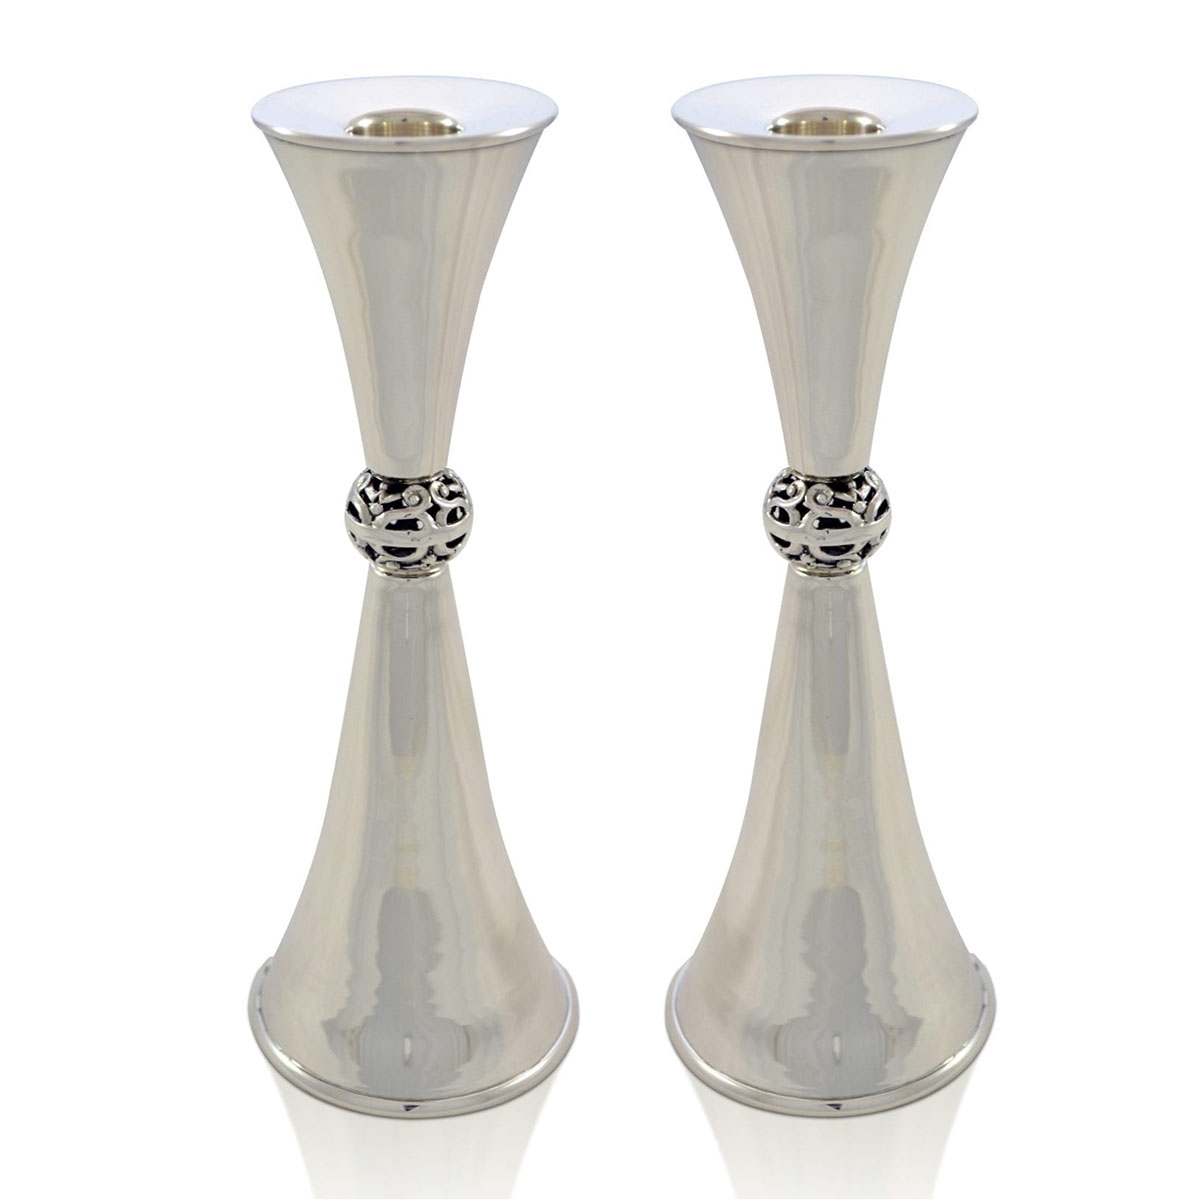 Nadav Art Majestic Sterling Silver Candlesticks with Ornament - 1